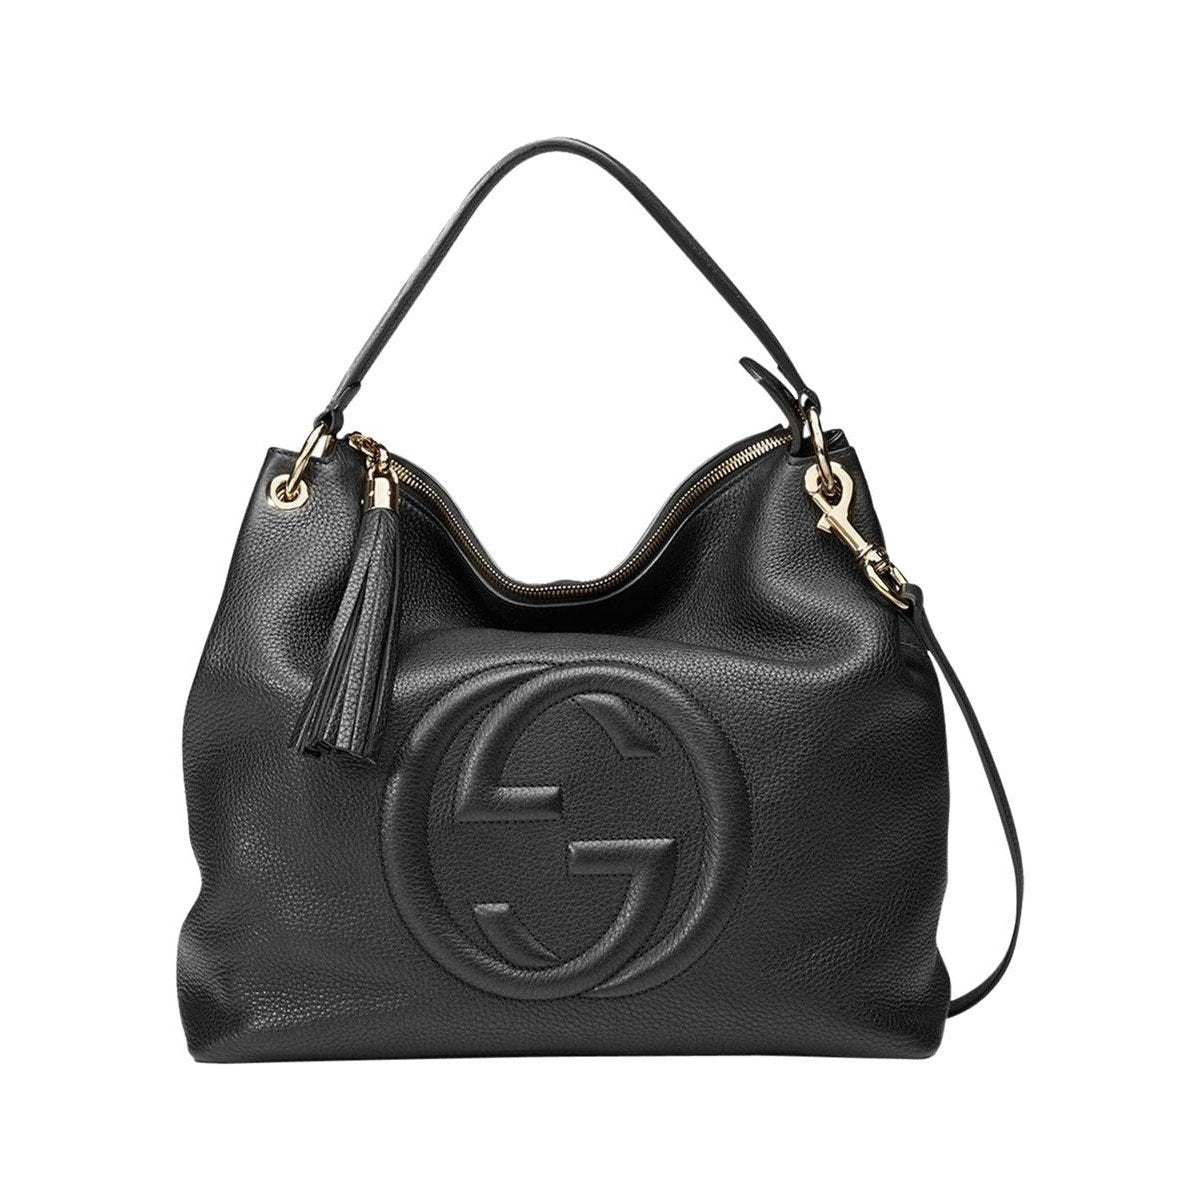 Gucci Black GG Disco Soho Leather Hobo Handbag 536194 at_Queen_Bee_of_Beverly_Hills